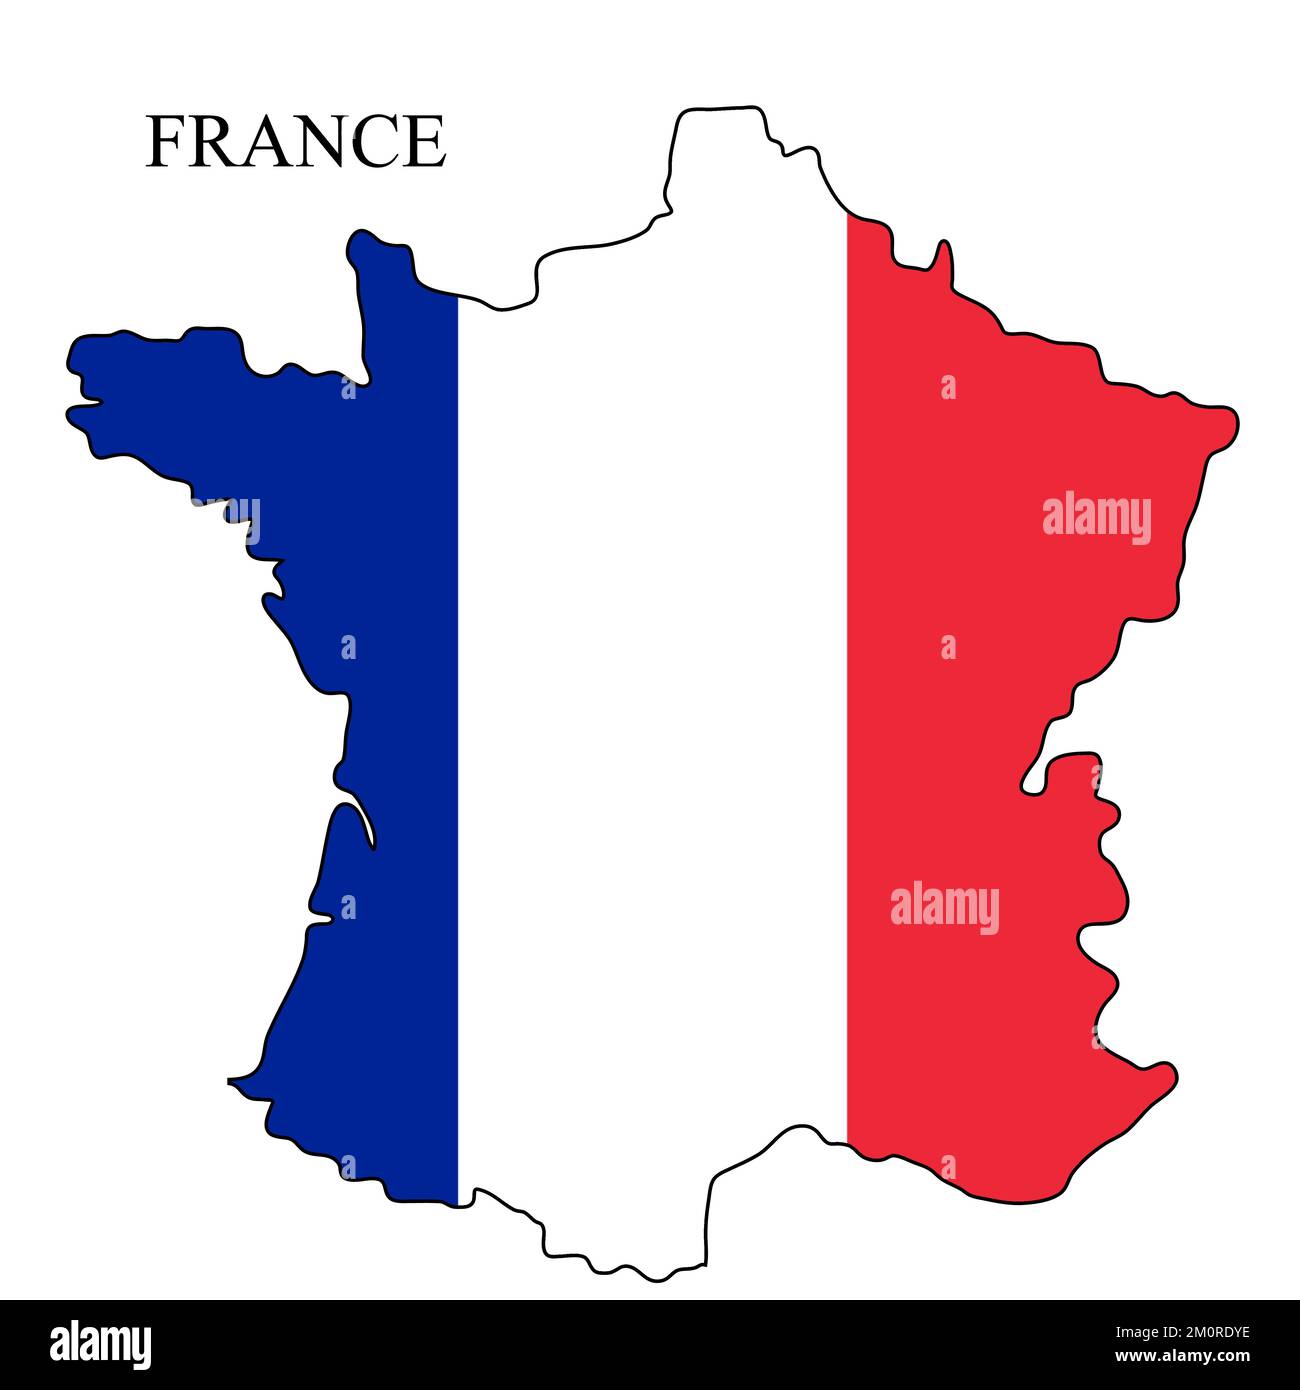 France map vector illustration. Global economy. Famous country. Western Europe. Europe. Stock Vector